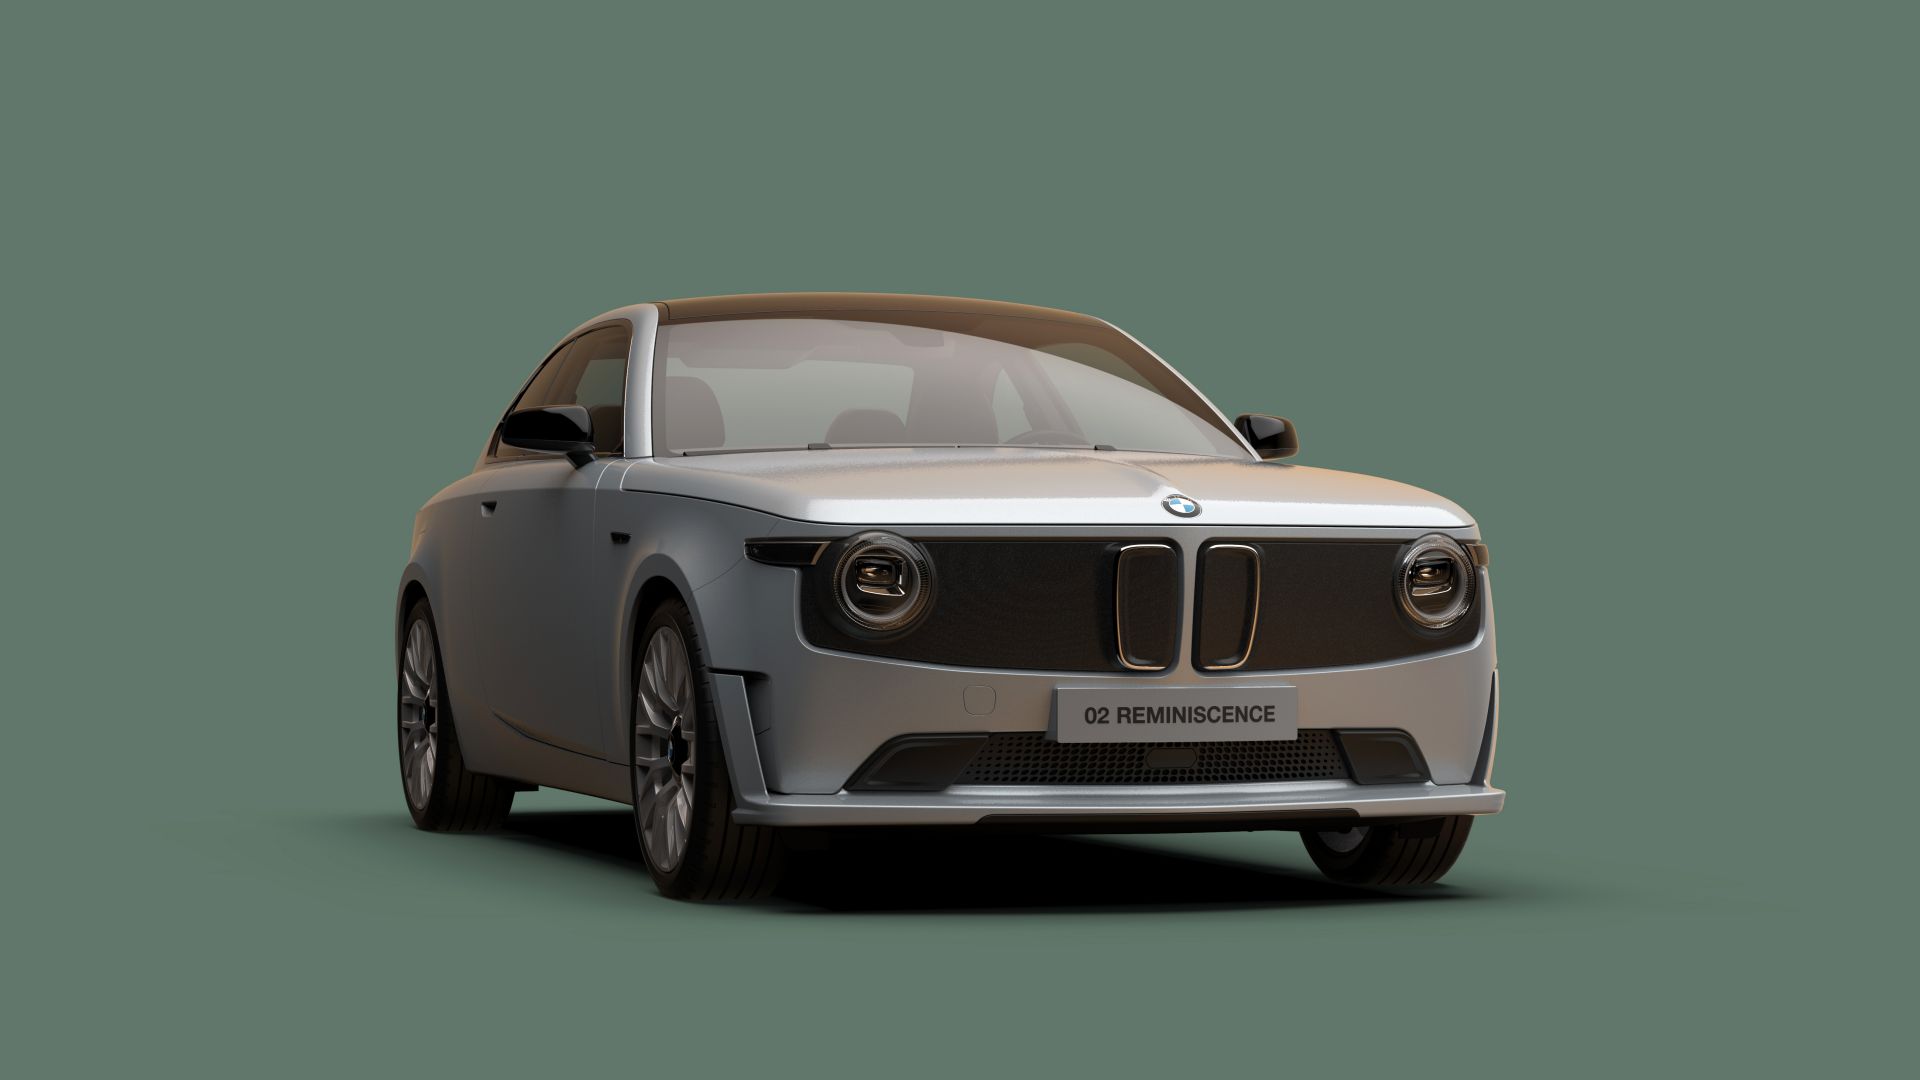 BMW 02 Reminiscence Concept